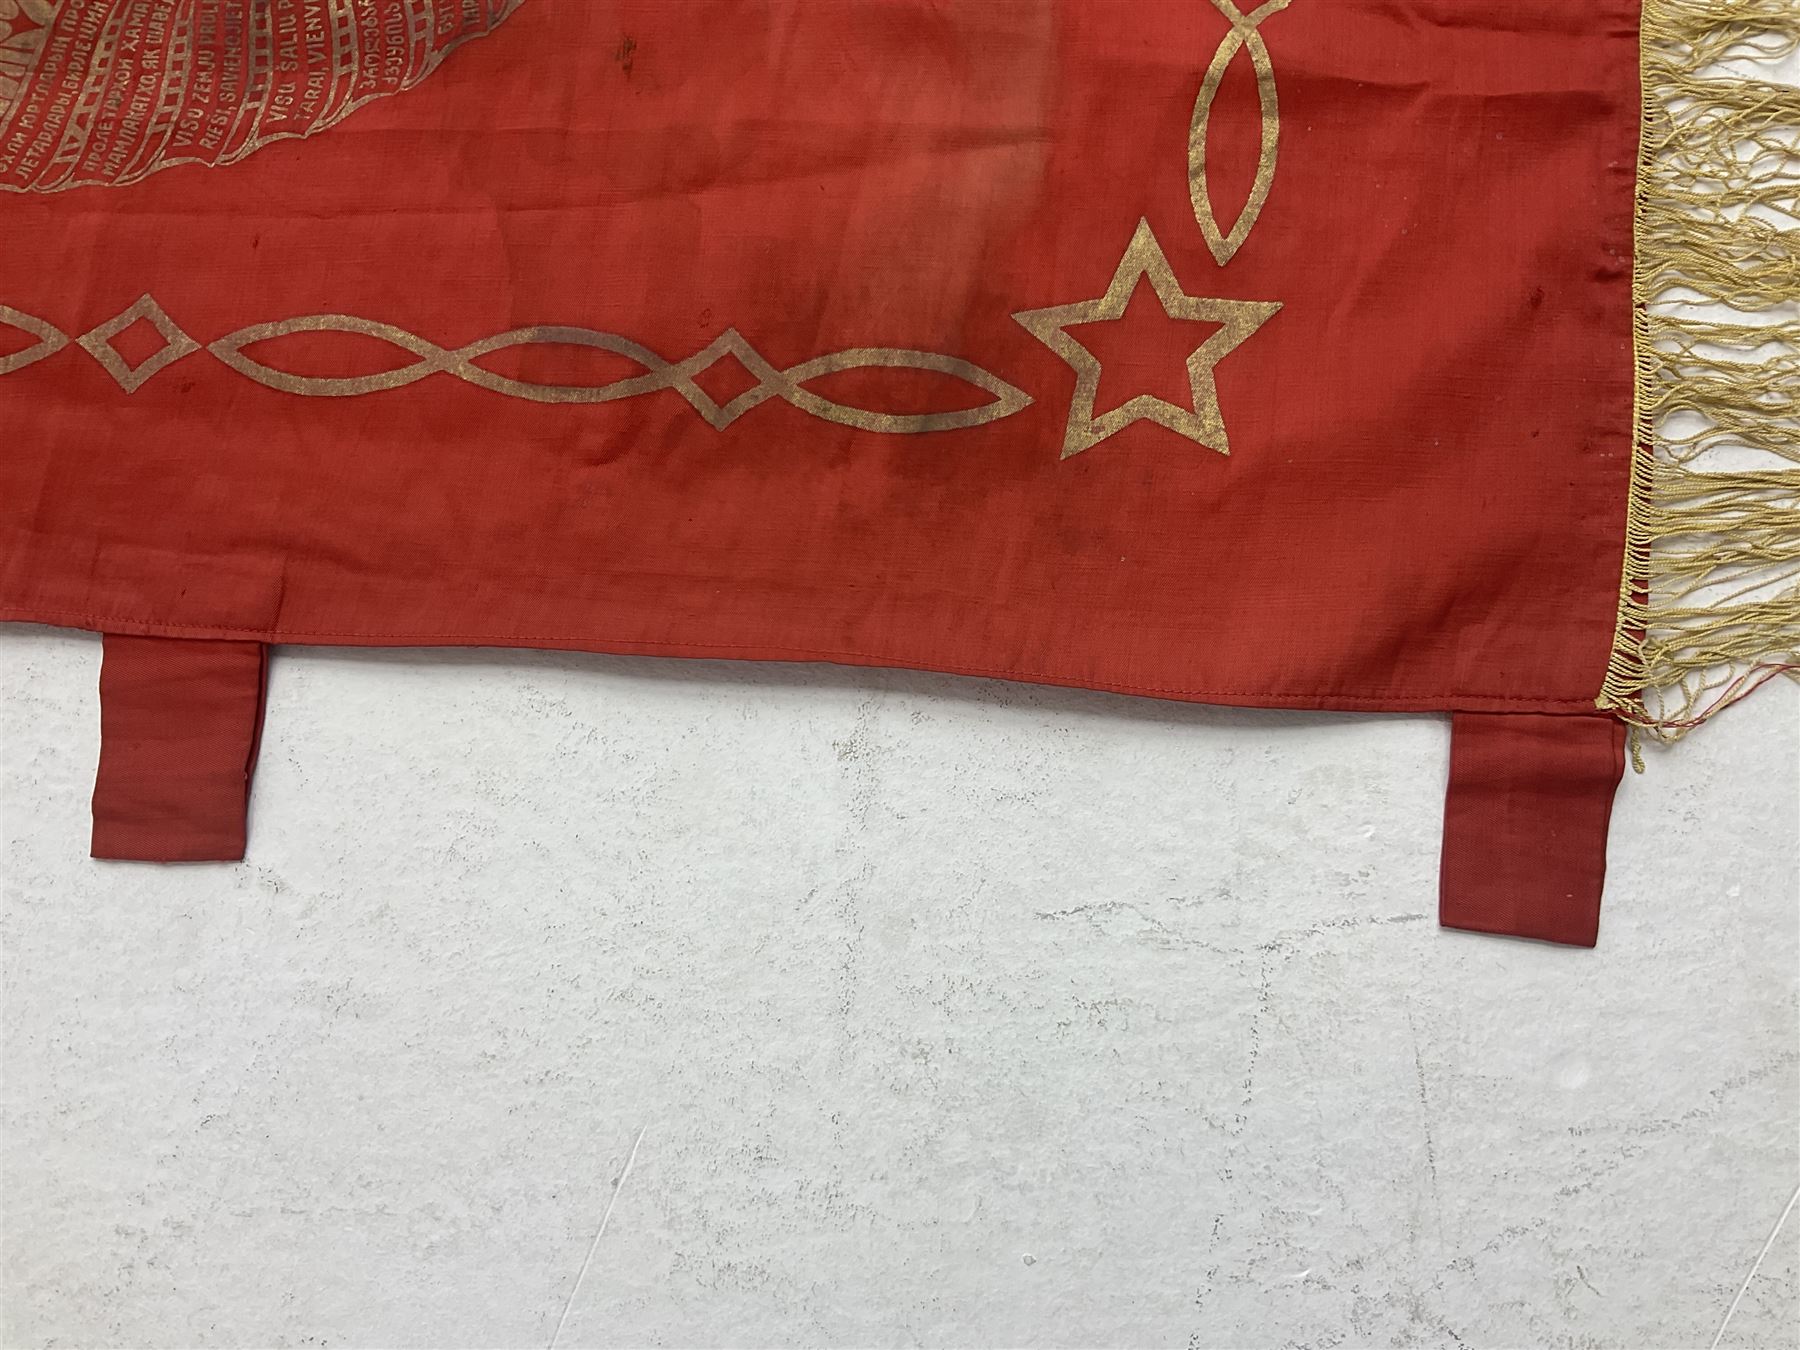 1970s Soviet banner printed in gold on a red ground - Image 13 of 38